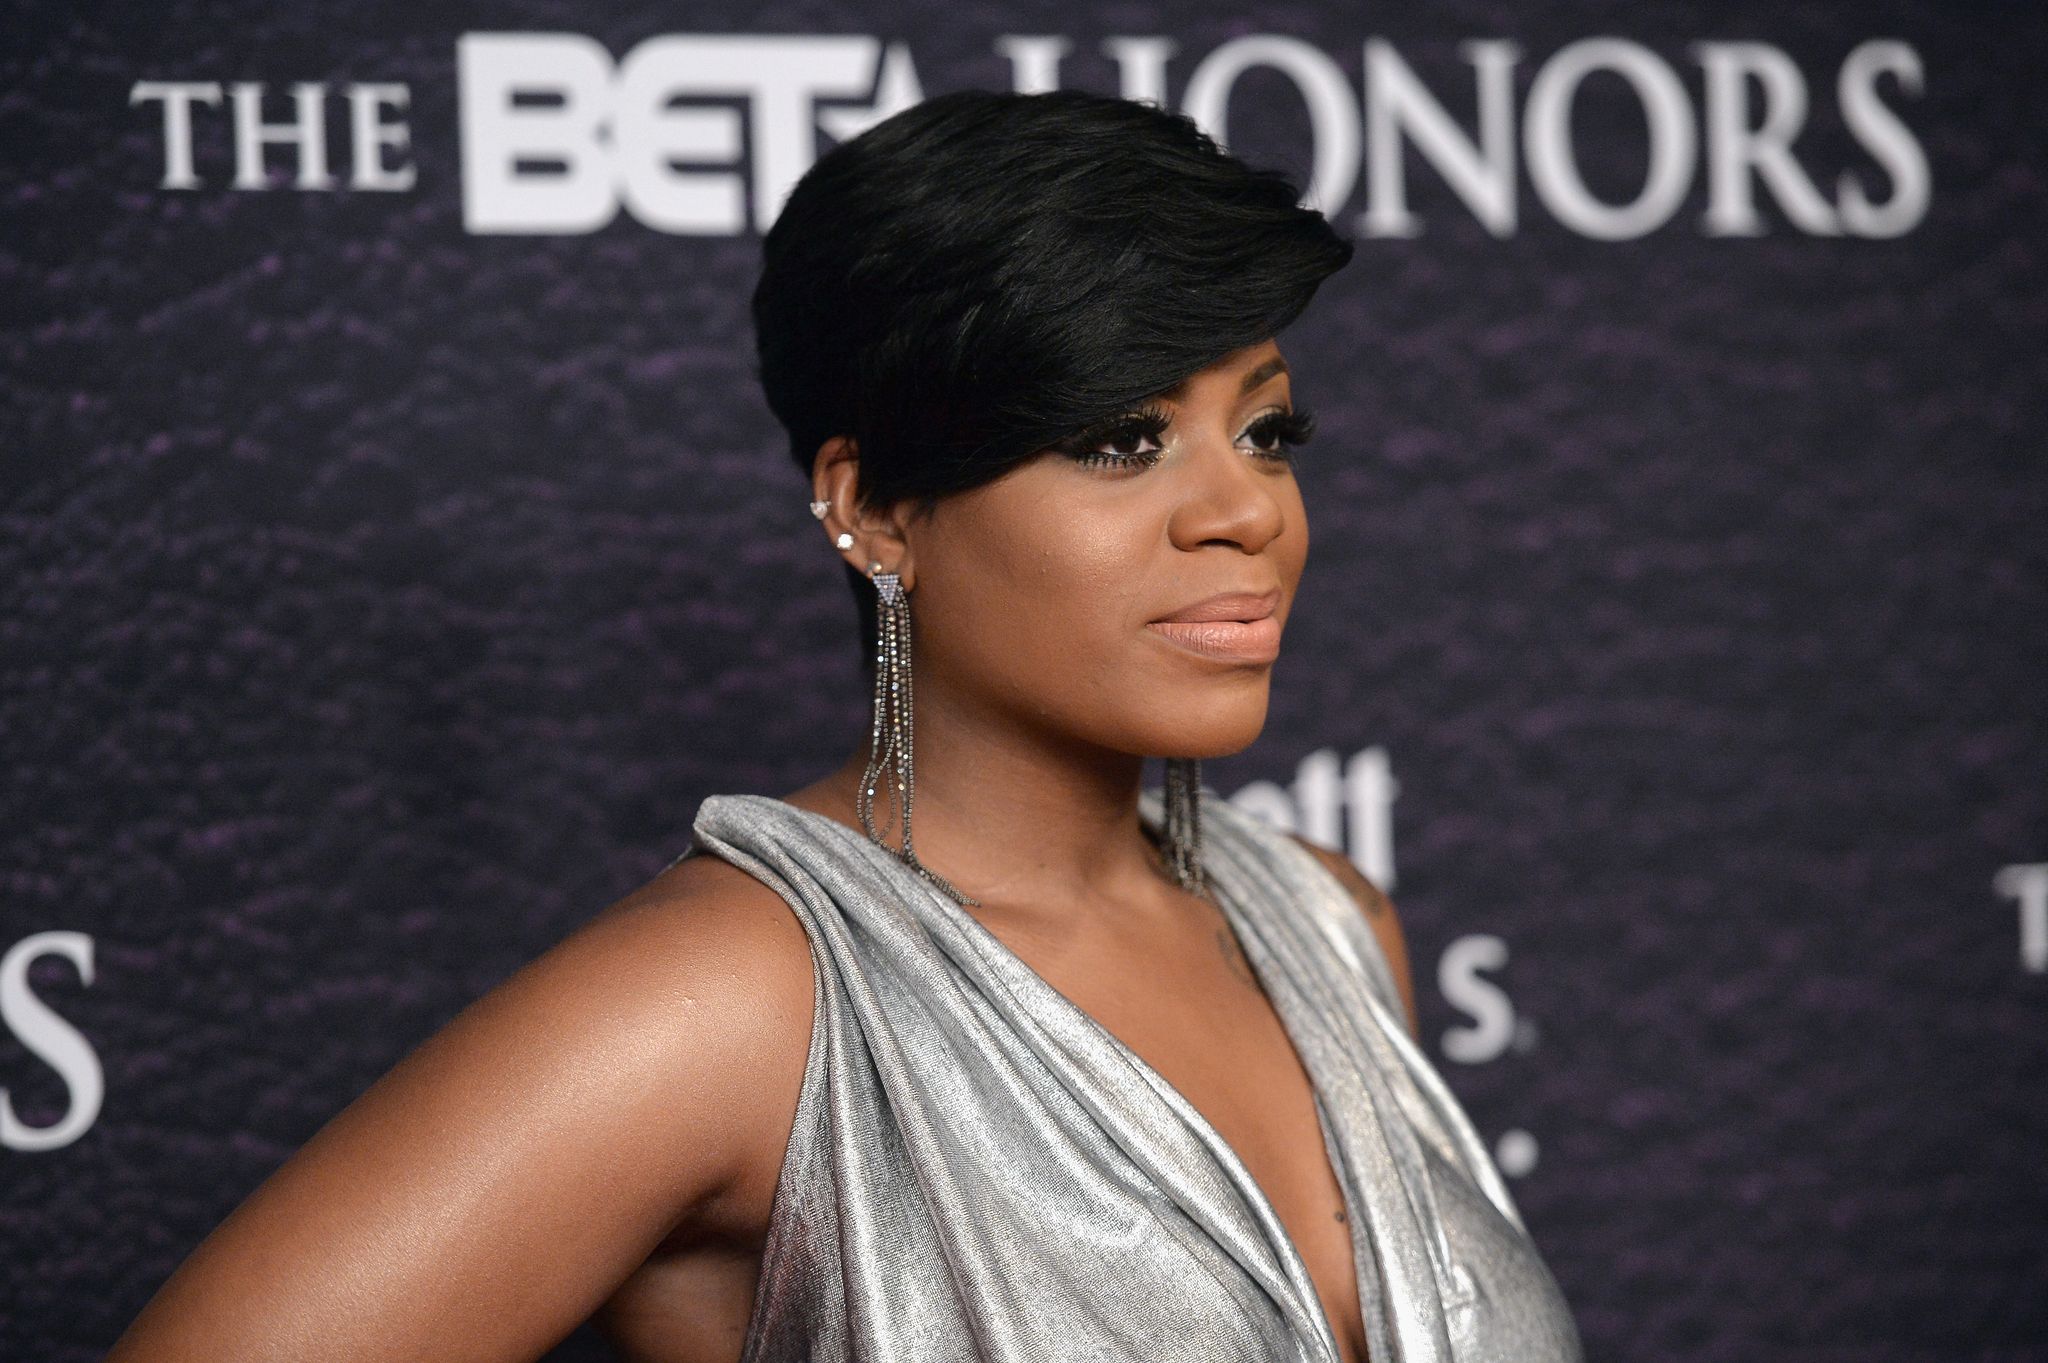 Fantasia at the BET Honors 2016 in Washington on March 5, 2016. |  Photo: Getty Images